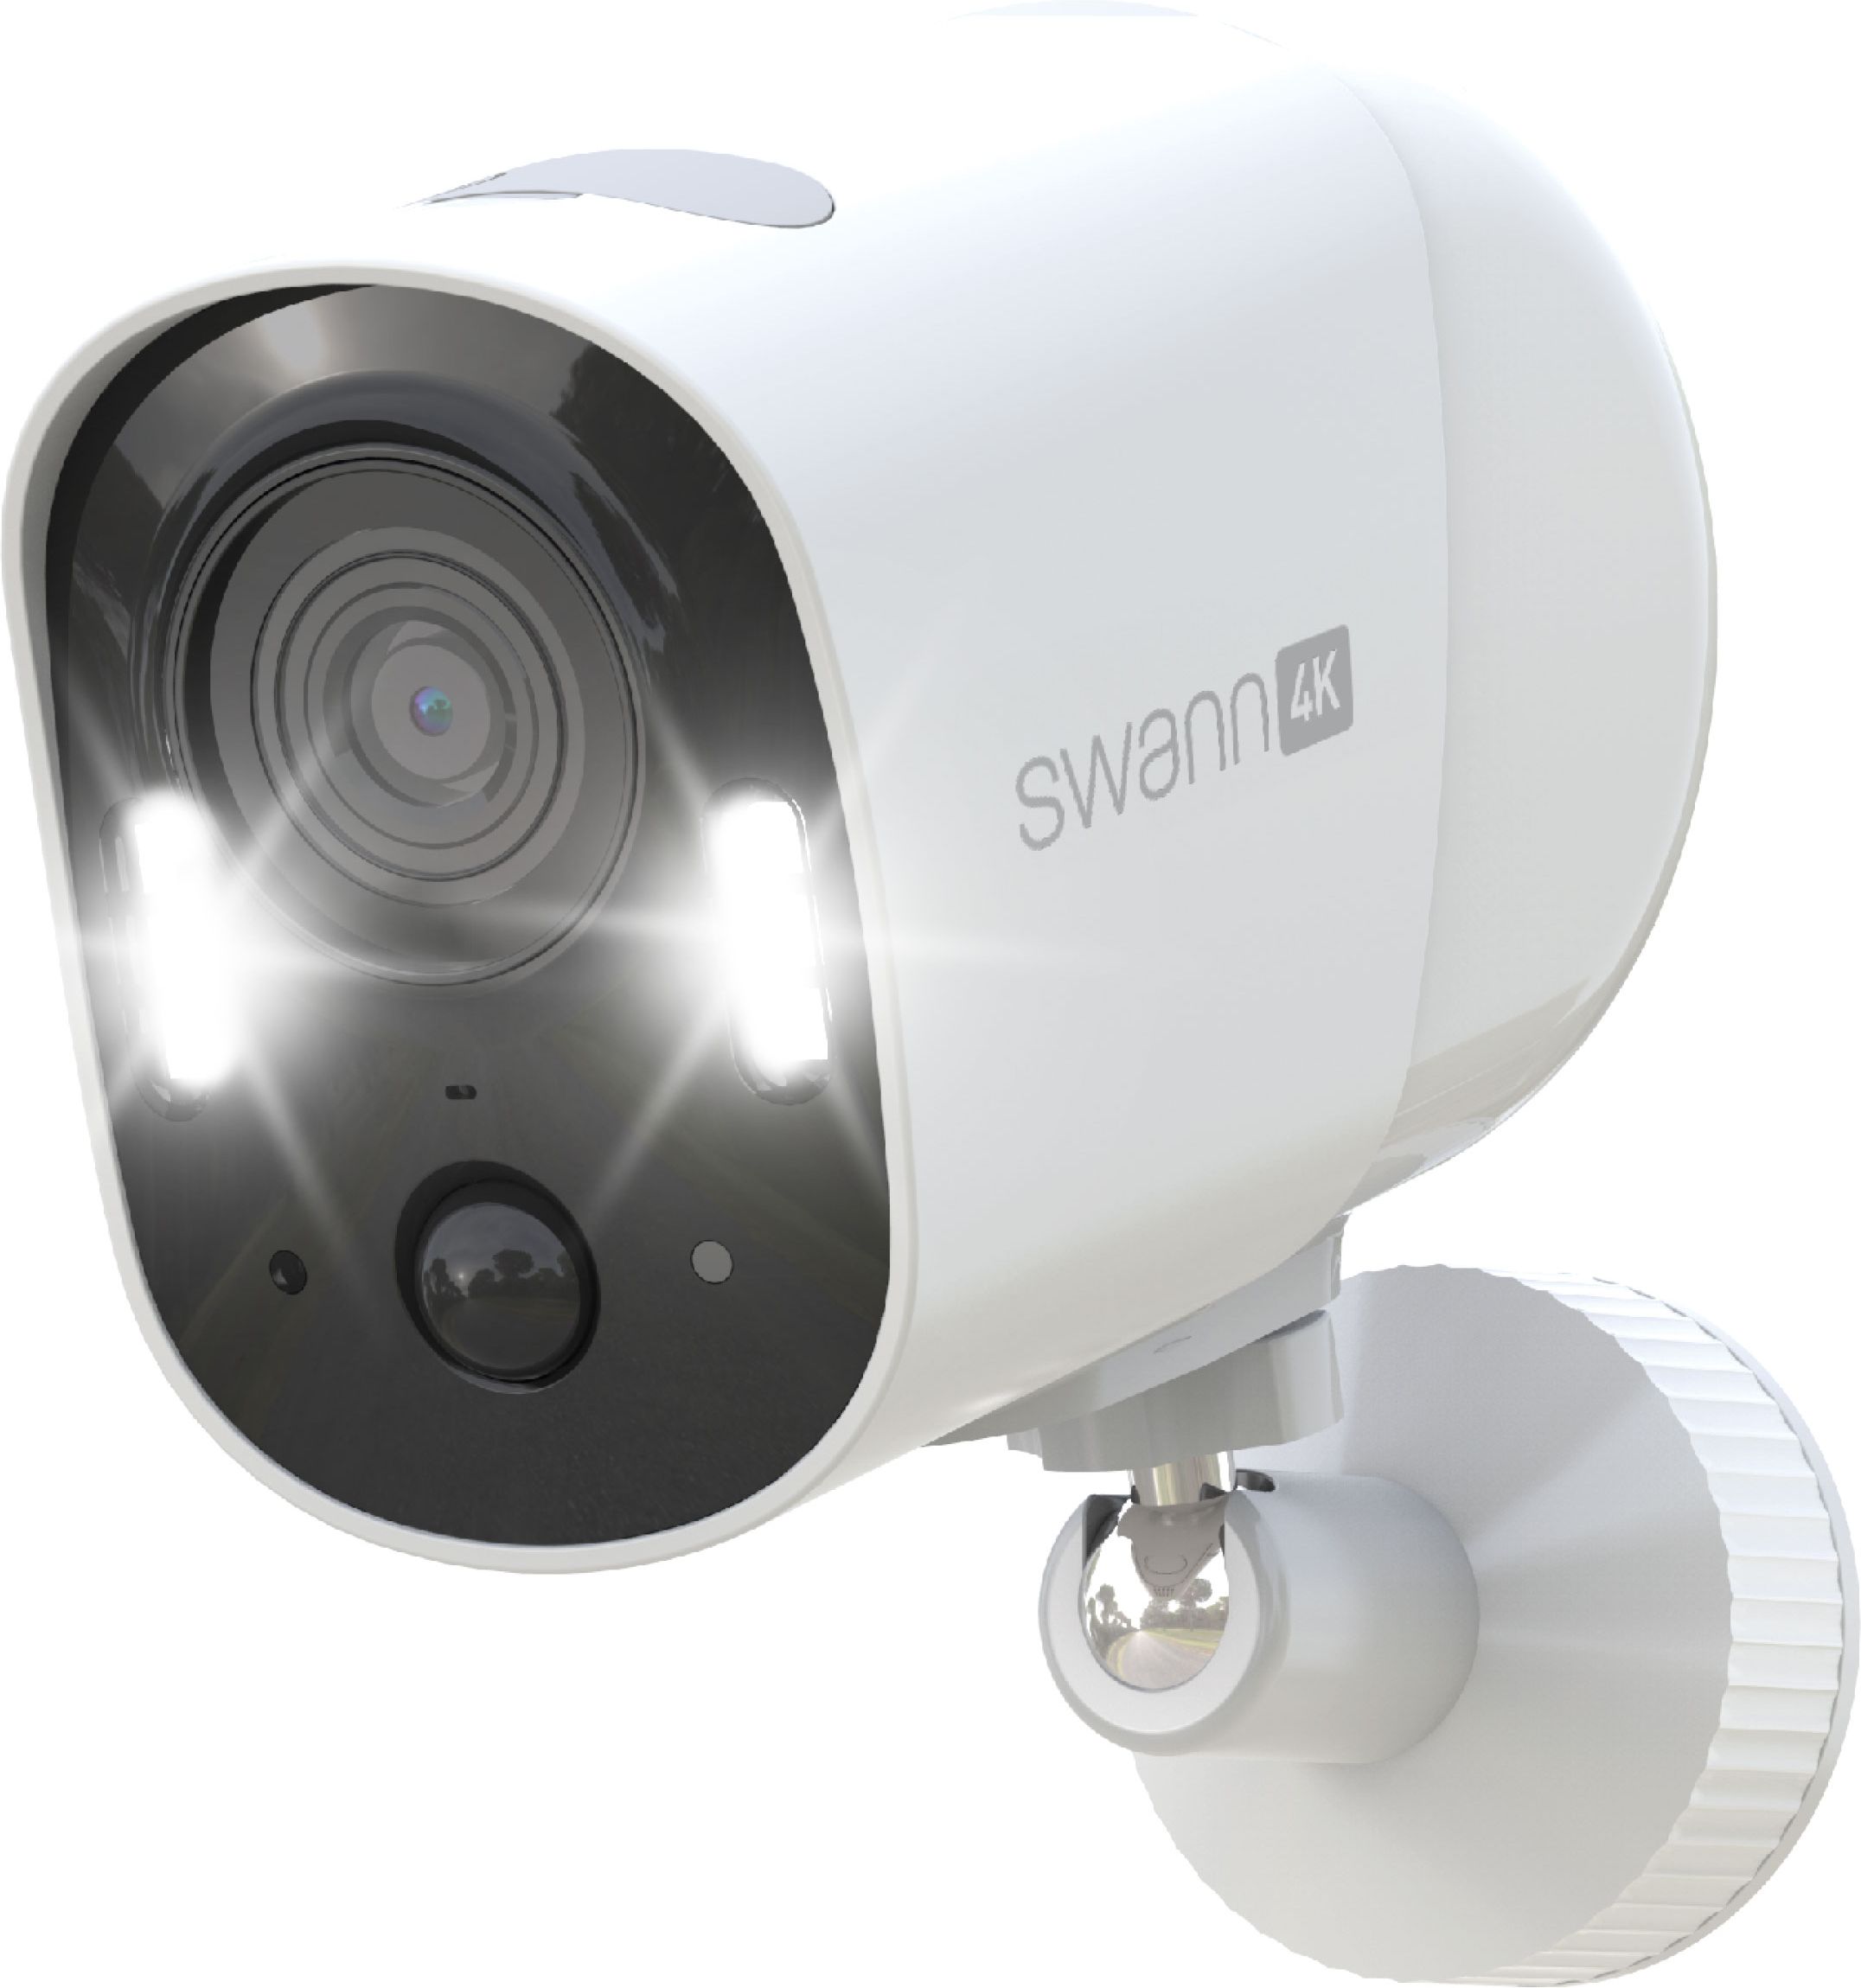 Swann Xtreem Pro 4K Wireless Camera with Spotlights Smart Home Security Camera - White, White